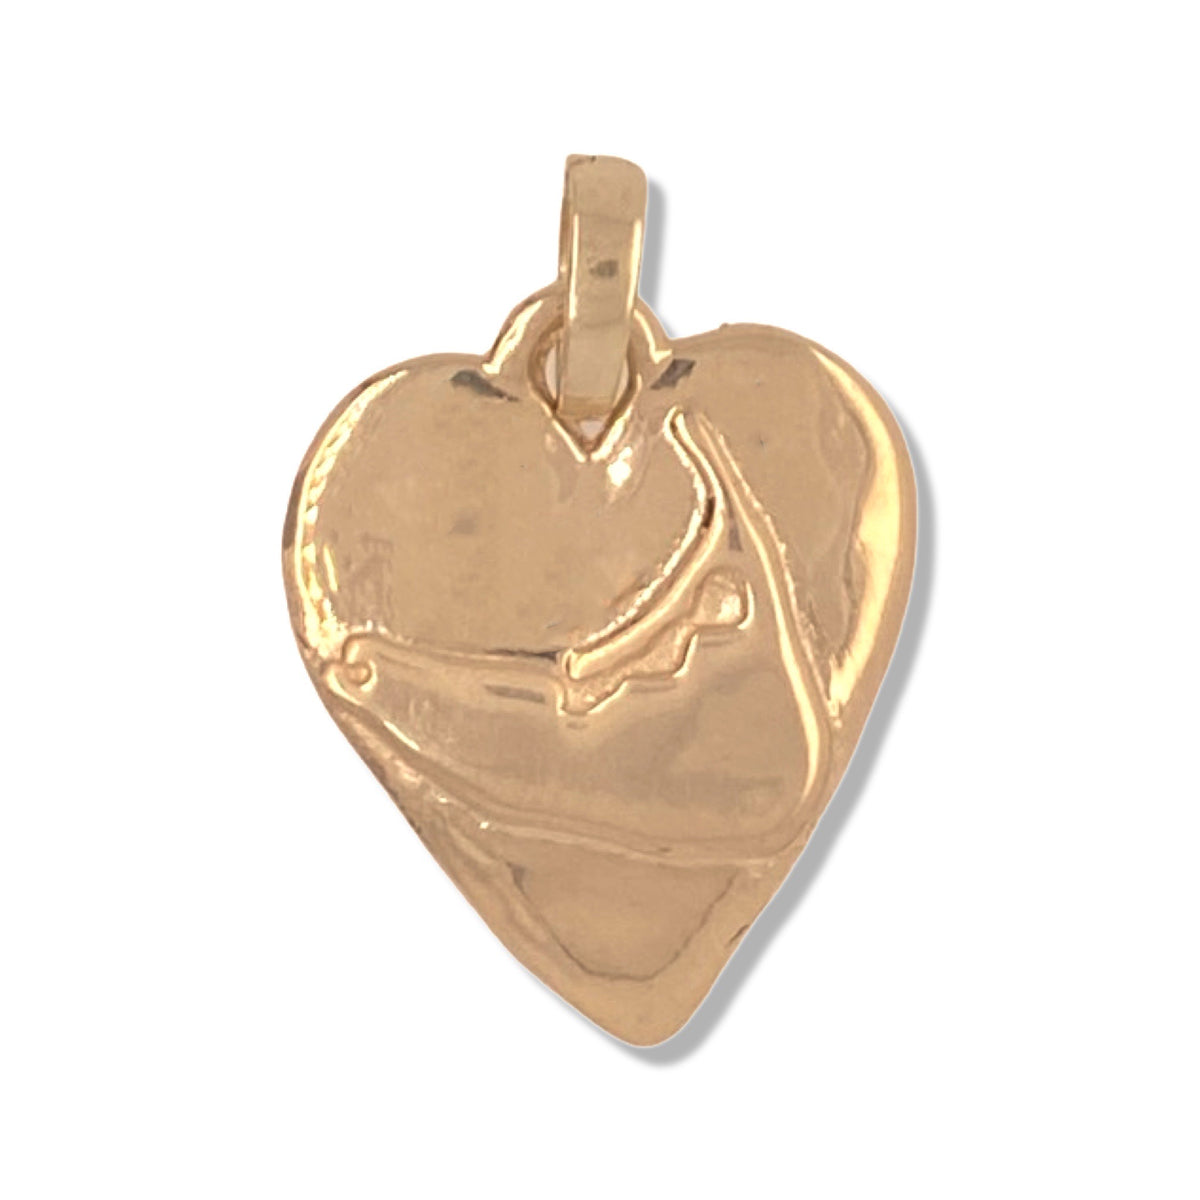 Nantucket Heart Charm in 14 k by Keely Smith Jewelry Designs